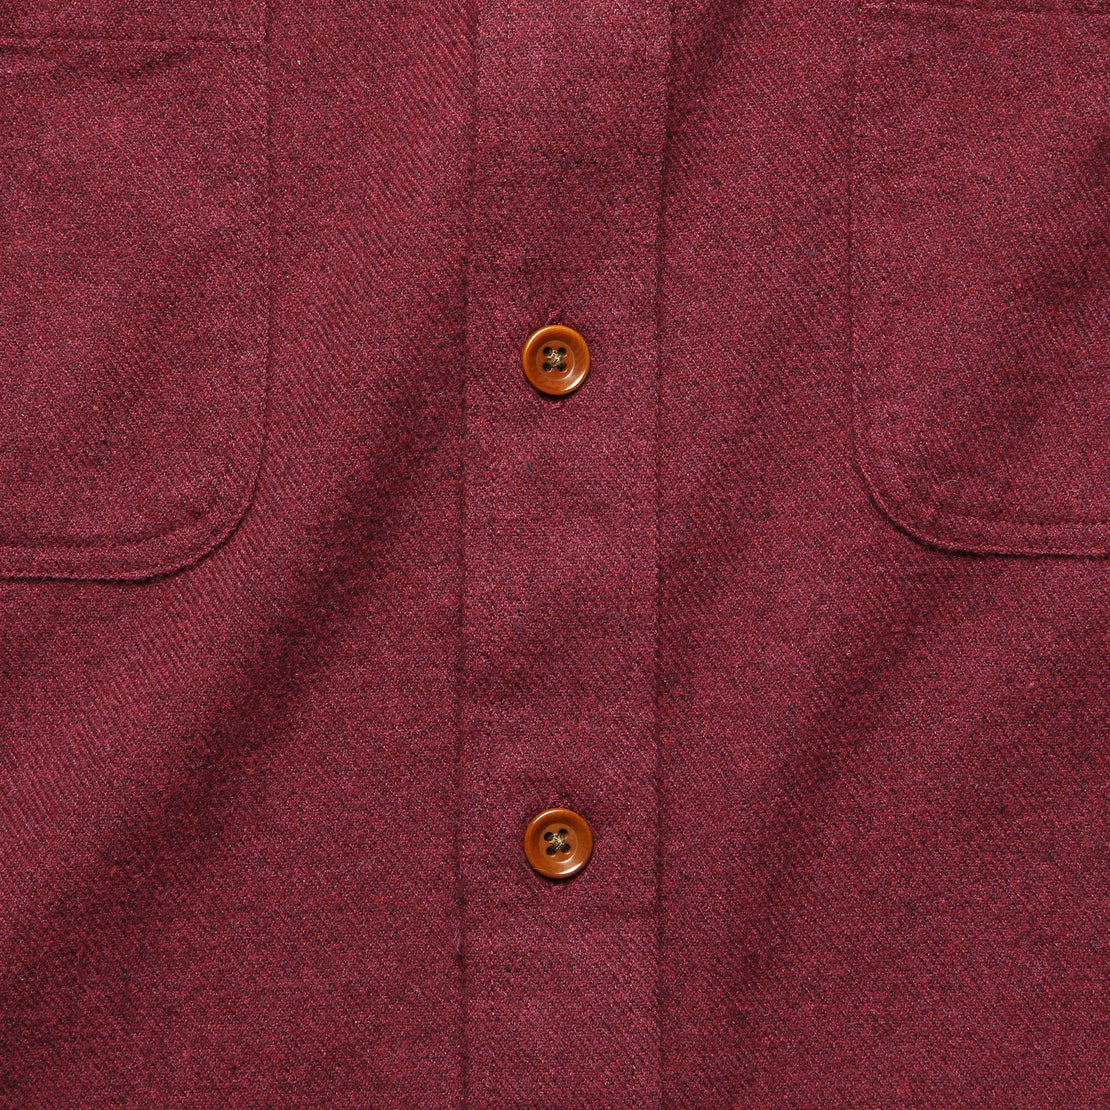 Brushed Alpine Flannel - Burgundy - Faherty - STAG Provisions - Tops - L/S Woven - Solid